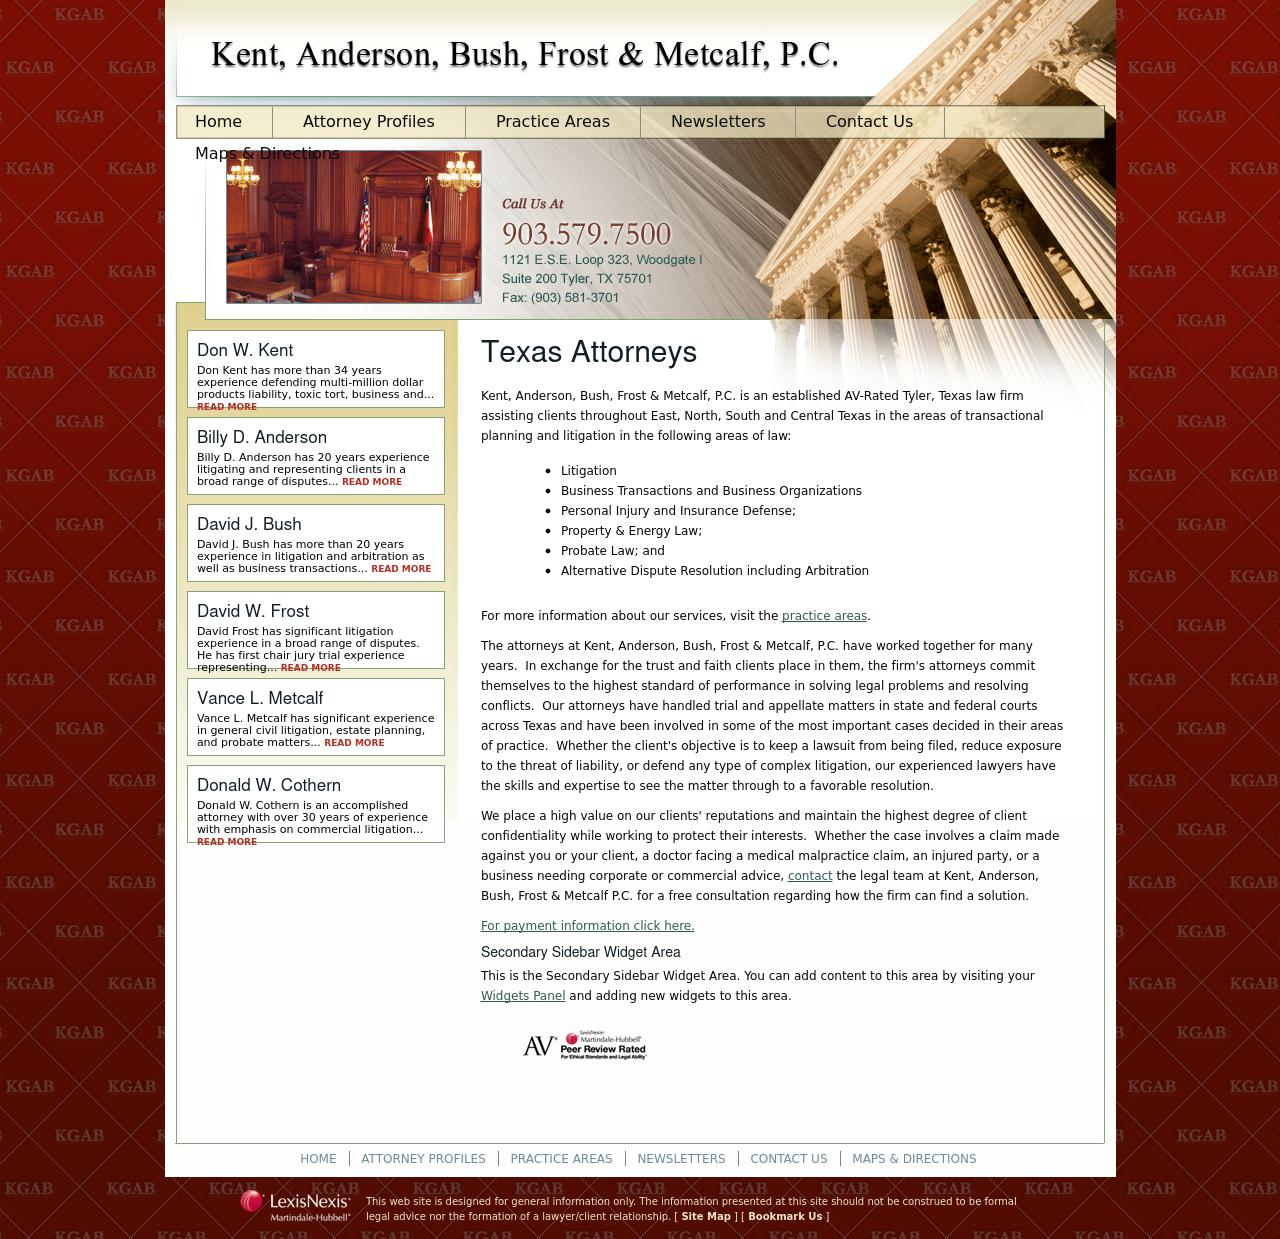 Kent Anderson Bush Frost & Metcalf PC - Tyler TX Lawyers